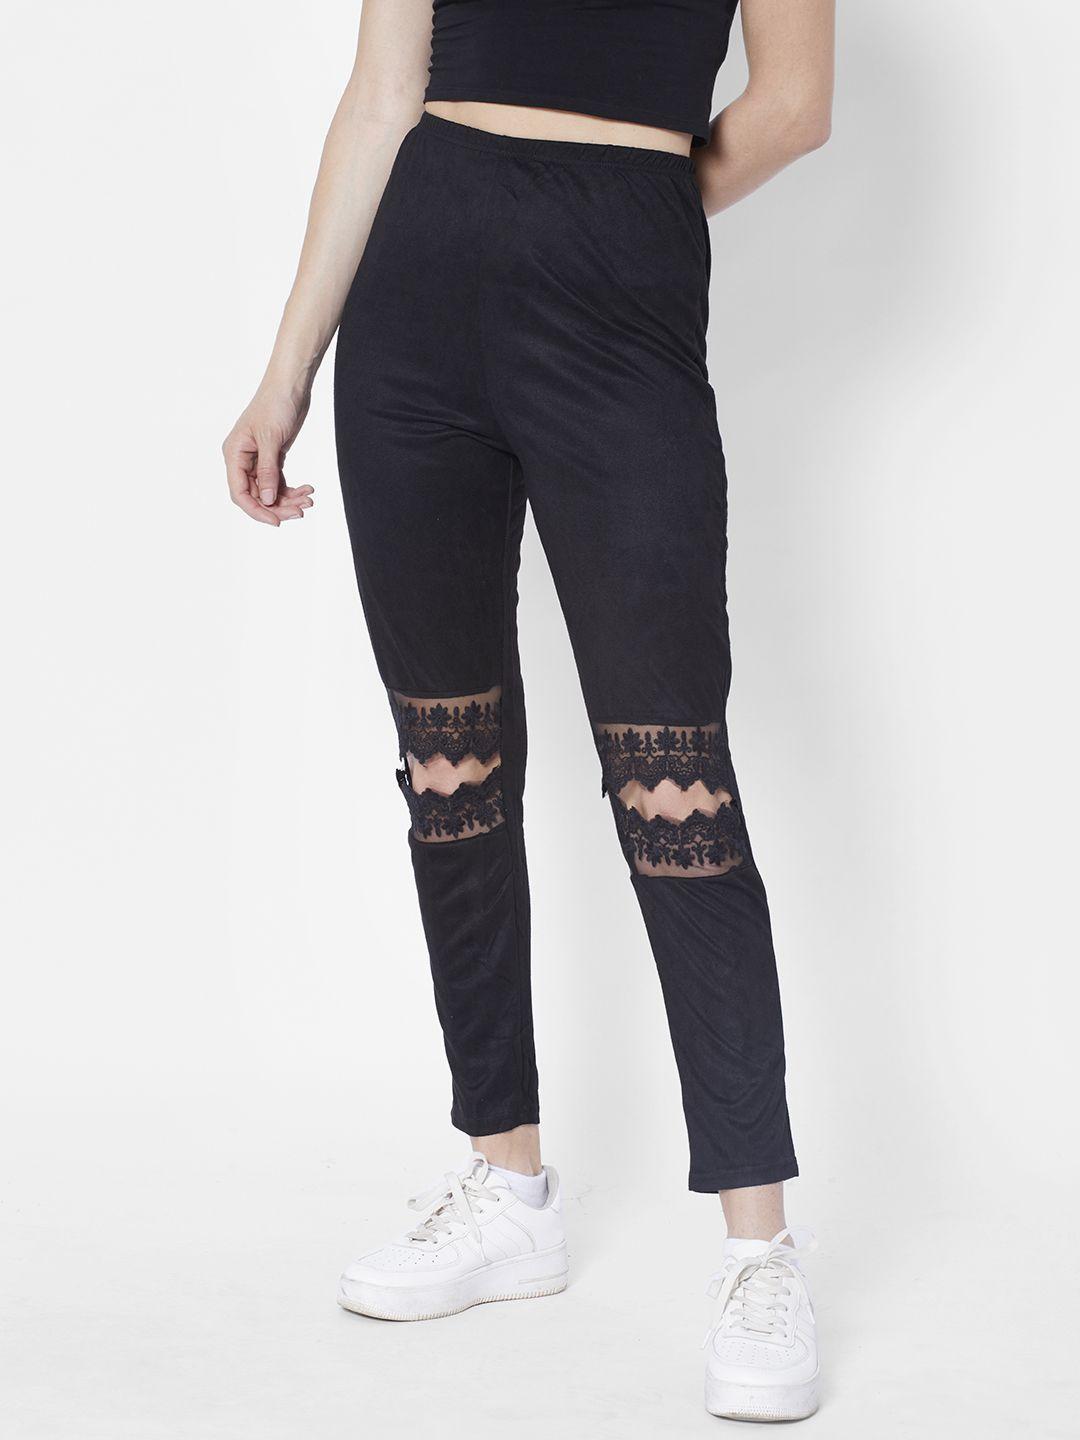 urbanic women black solid high-waist lace inserts cut out track pants